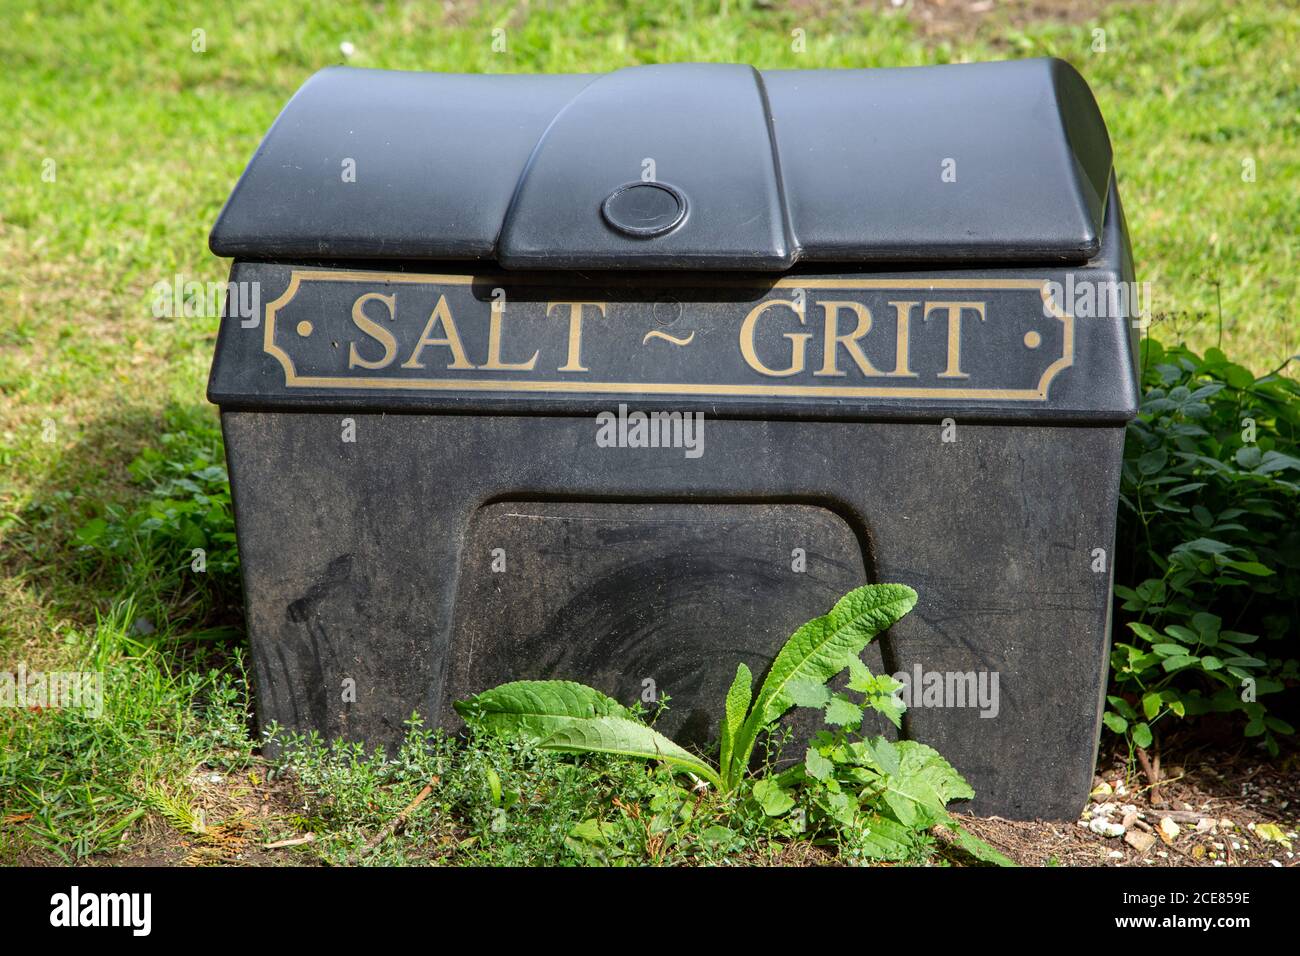 A Salt and Grit bin on the side of a street ready for gritting the pavements in winter Stock Photo